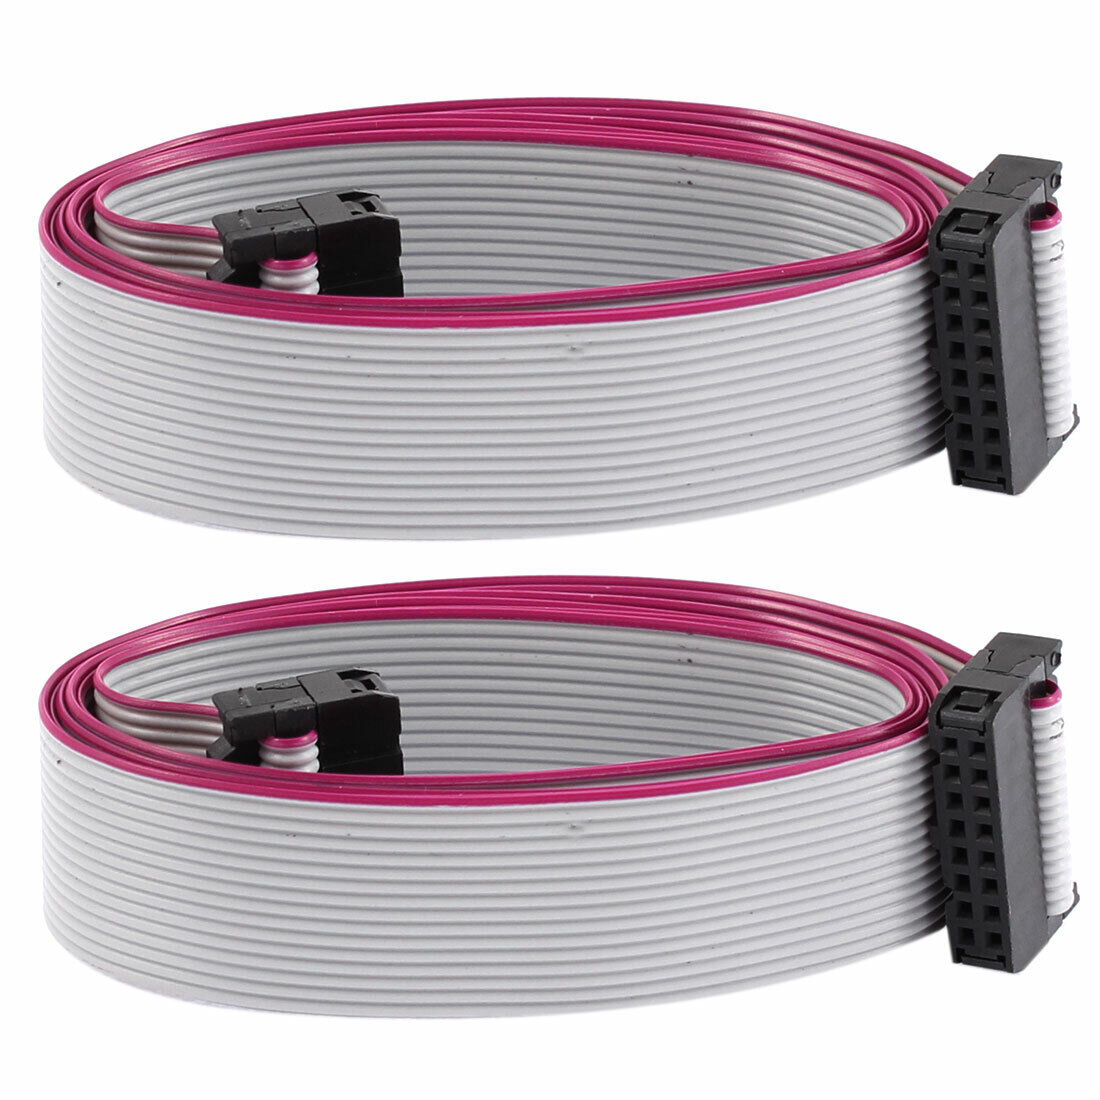 2.54mm Pitch 16 Pins 16 Wires F/F IDC Connector Flat Ribbon Cable 1 Meter 2pcs